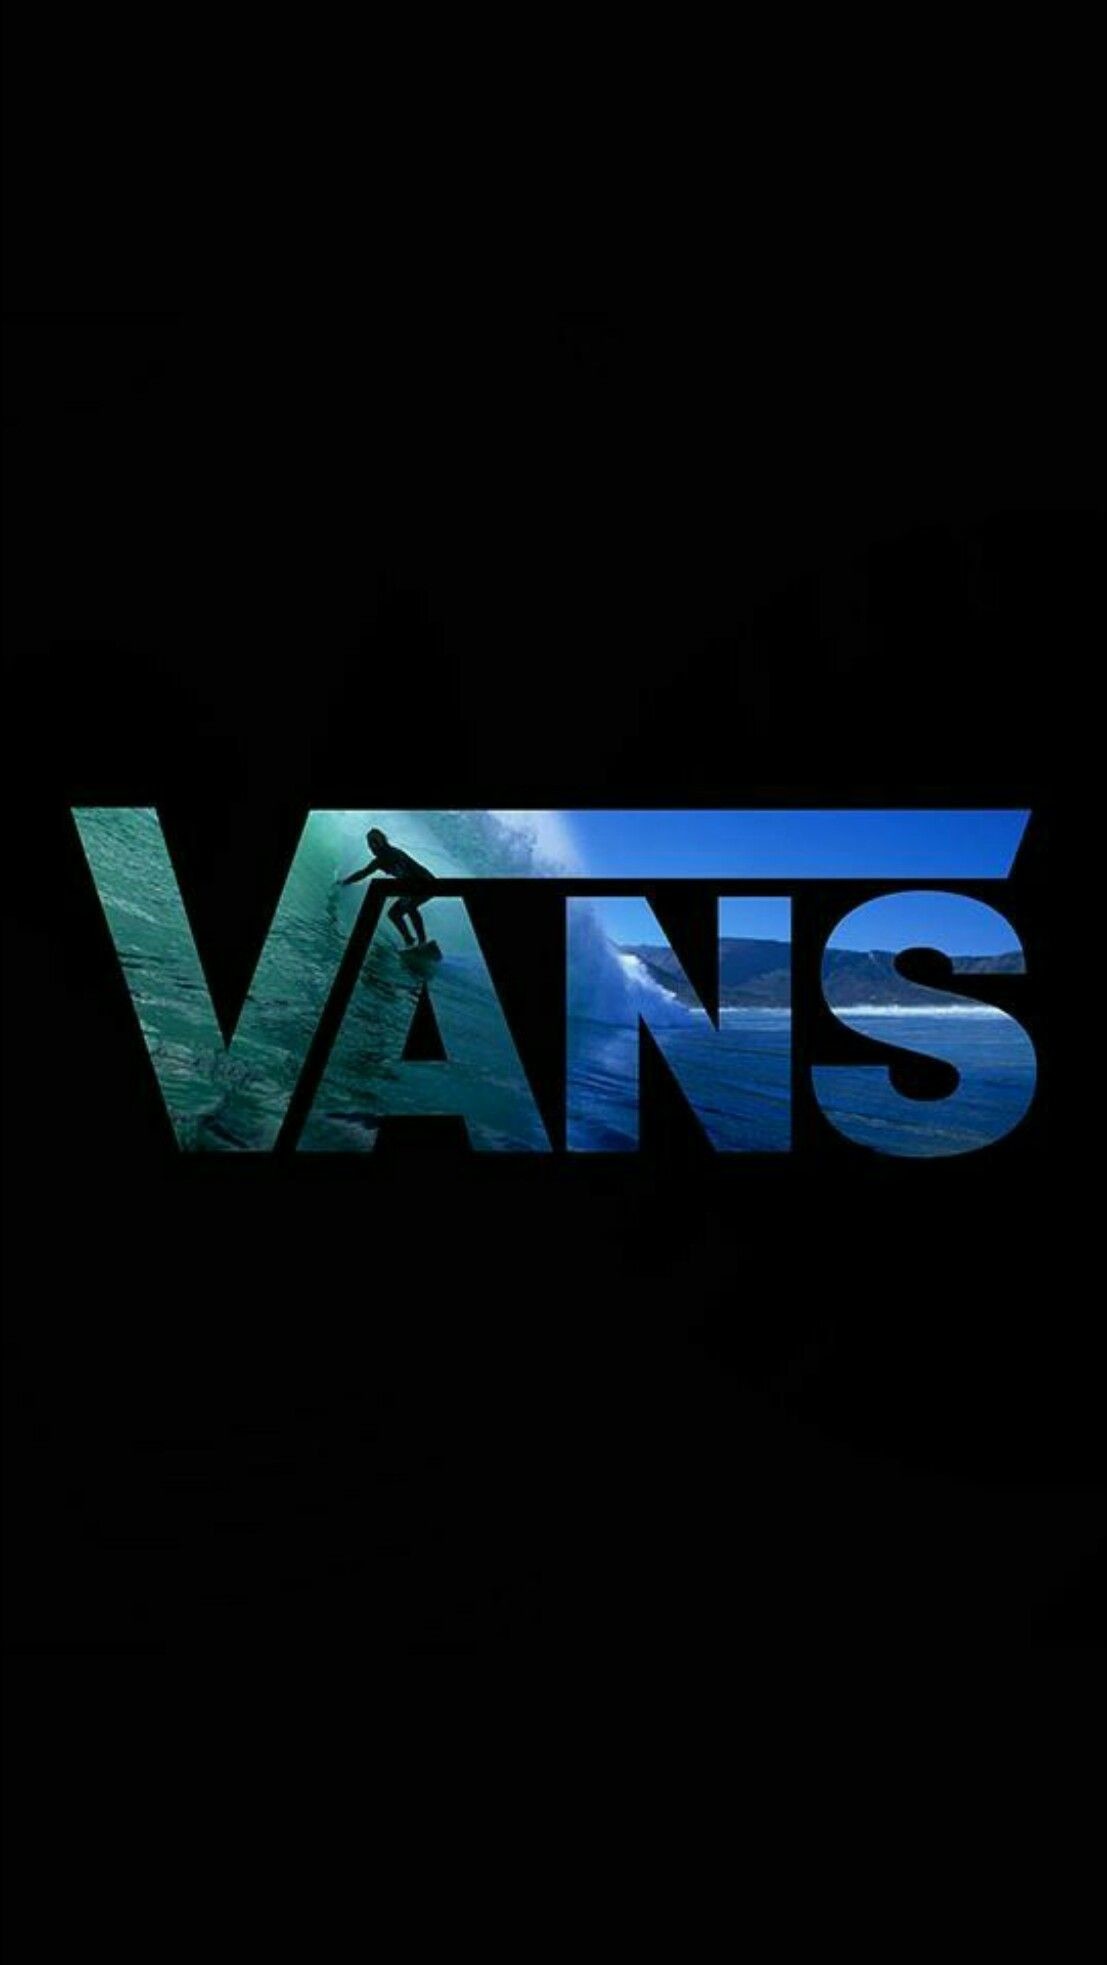 1107x1965 #vans #black #wallpaper #iPhone #android Hd Phone Wallpapers, Cool  Wallpapers